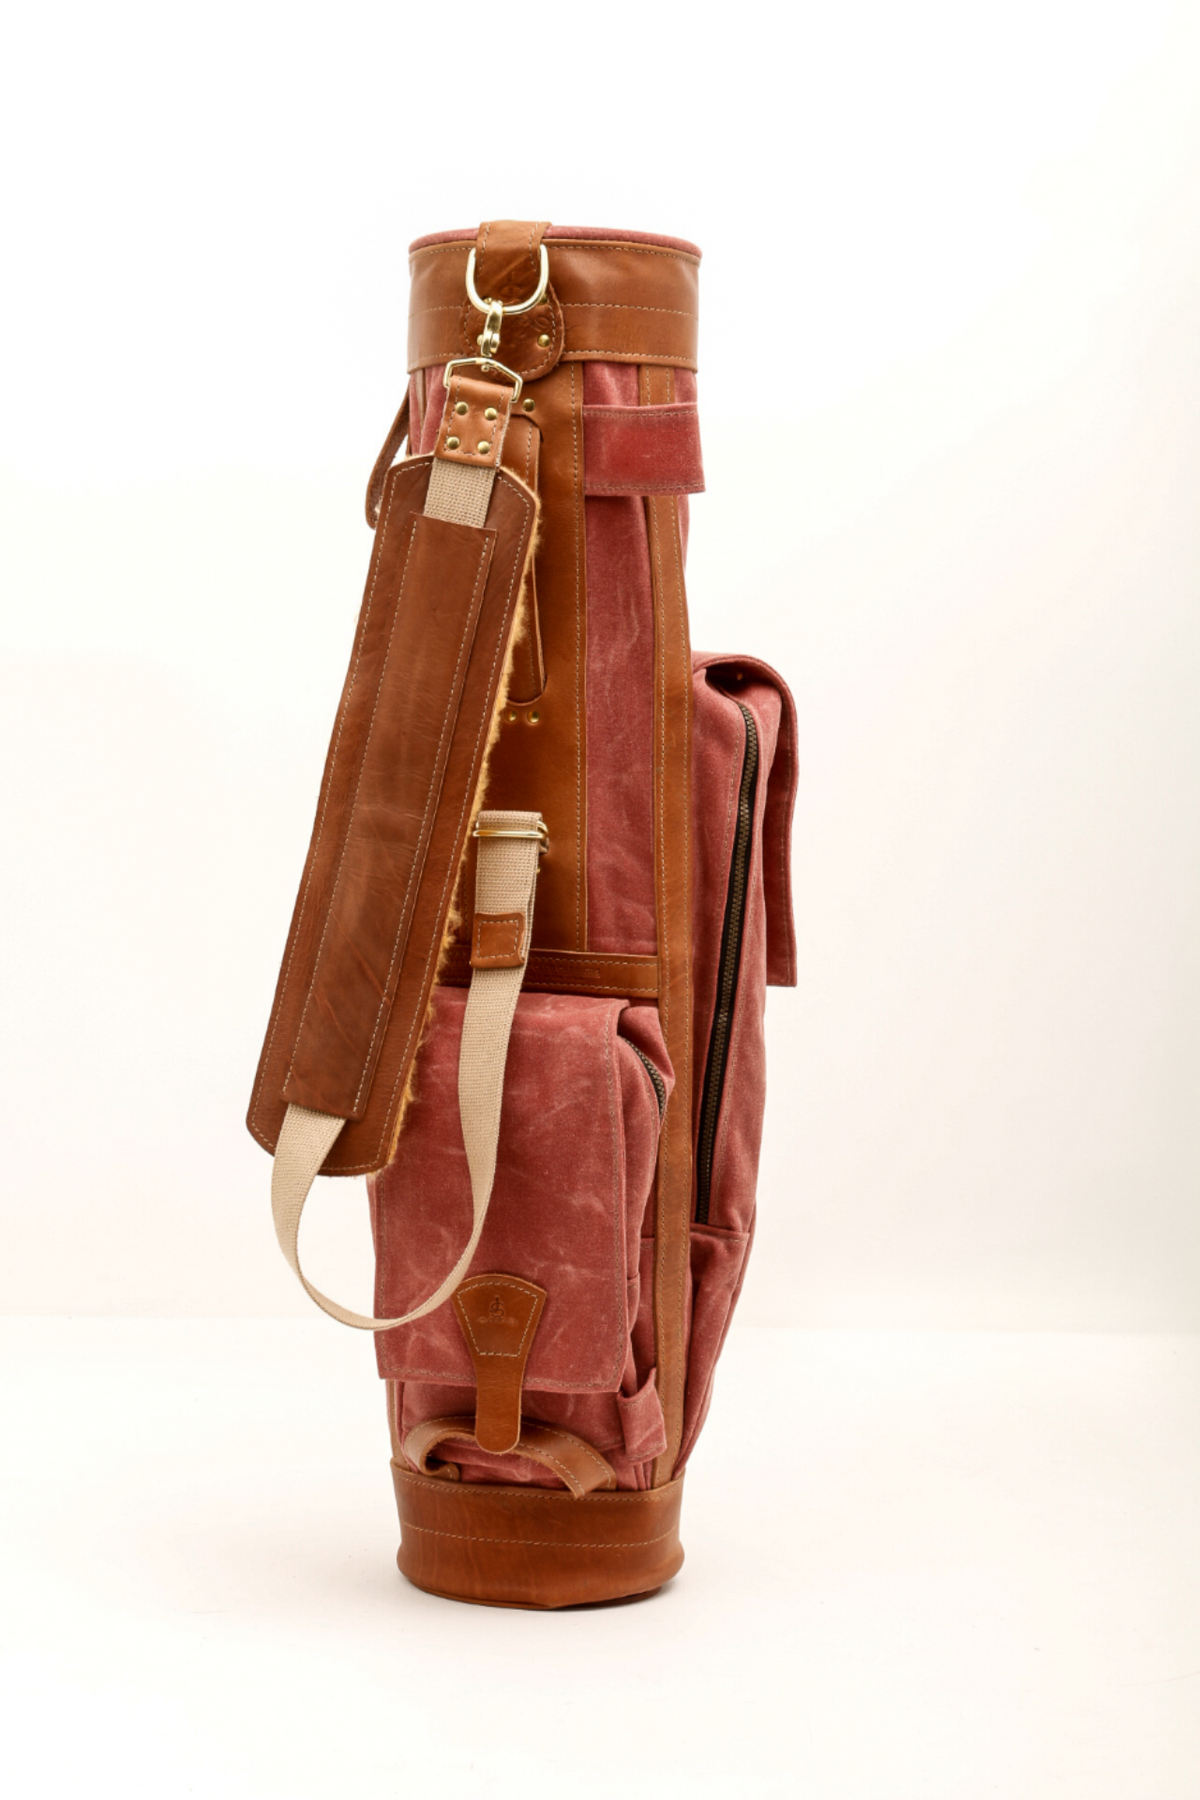 Airliner Style Golf Bag - Steurer & Jacoby